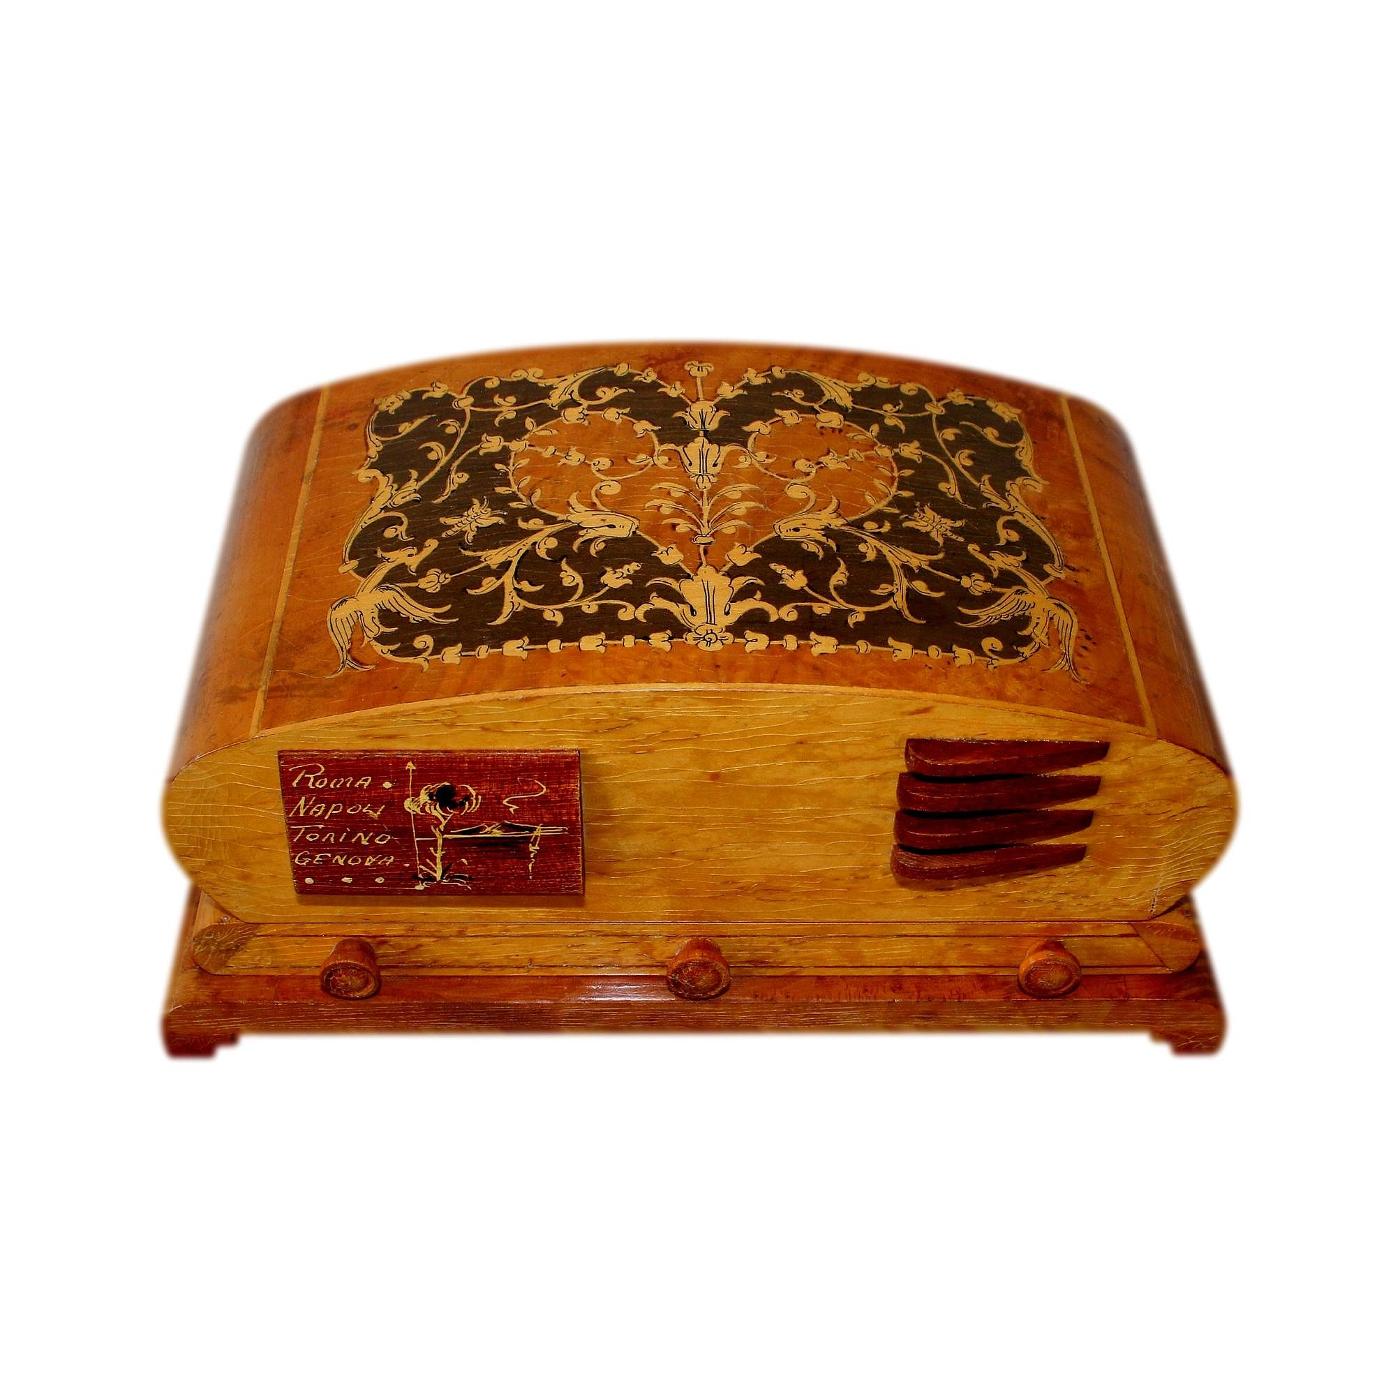 Superb Italian Musical Vintage Jewellery Box With Marquetry Inlay